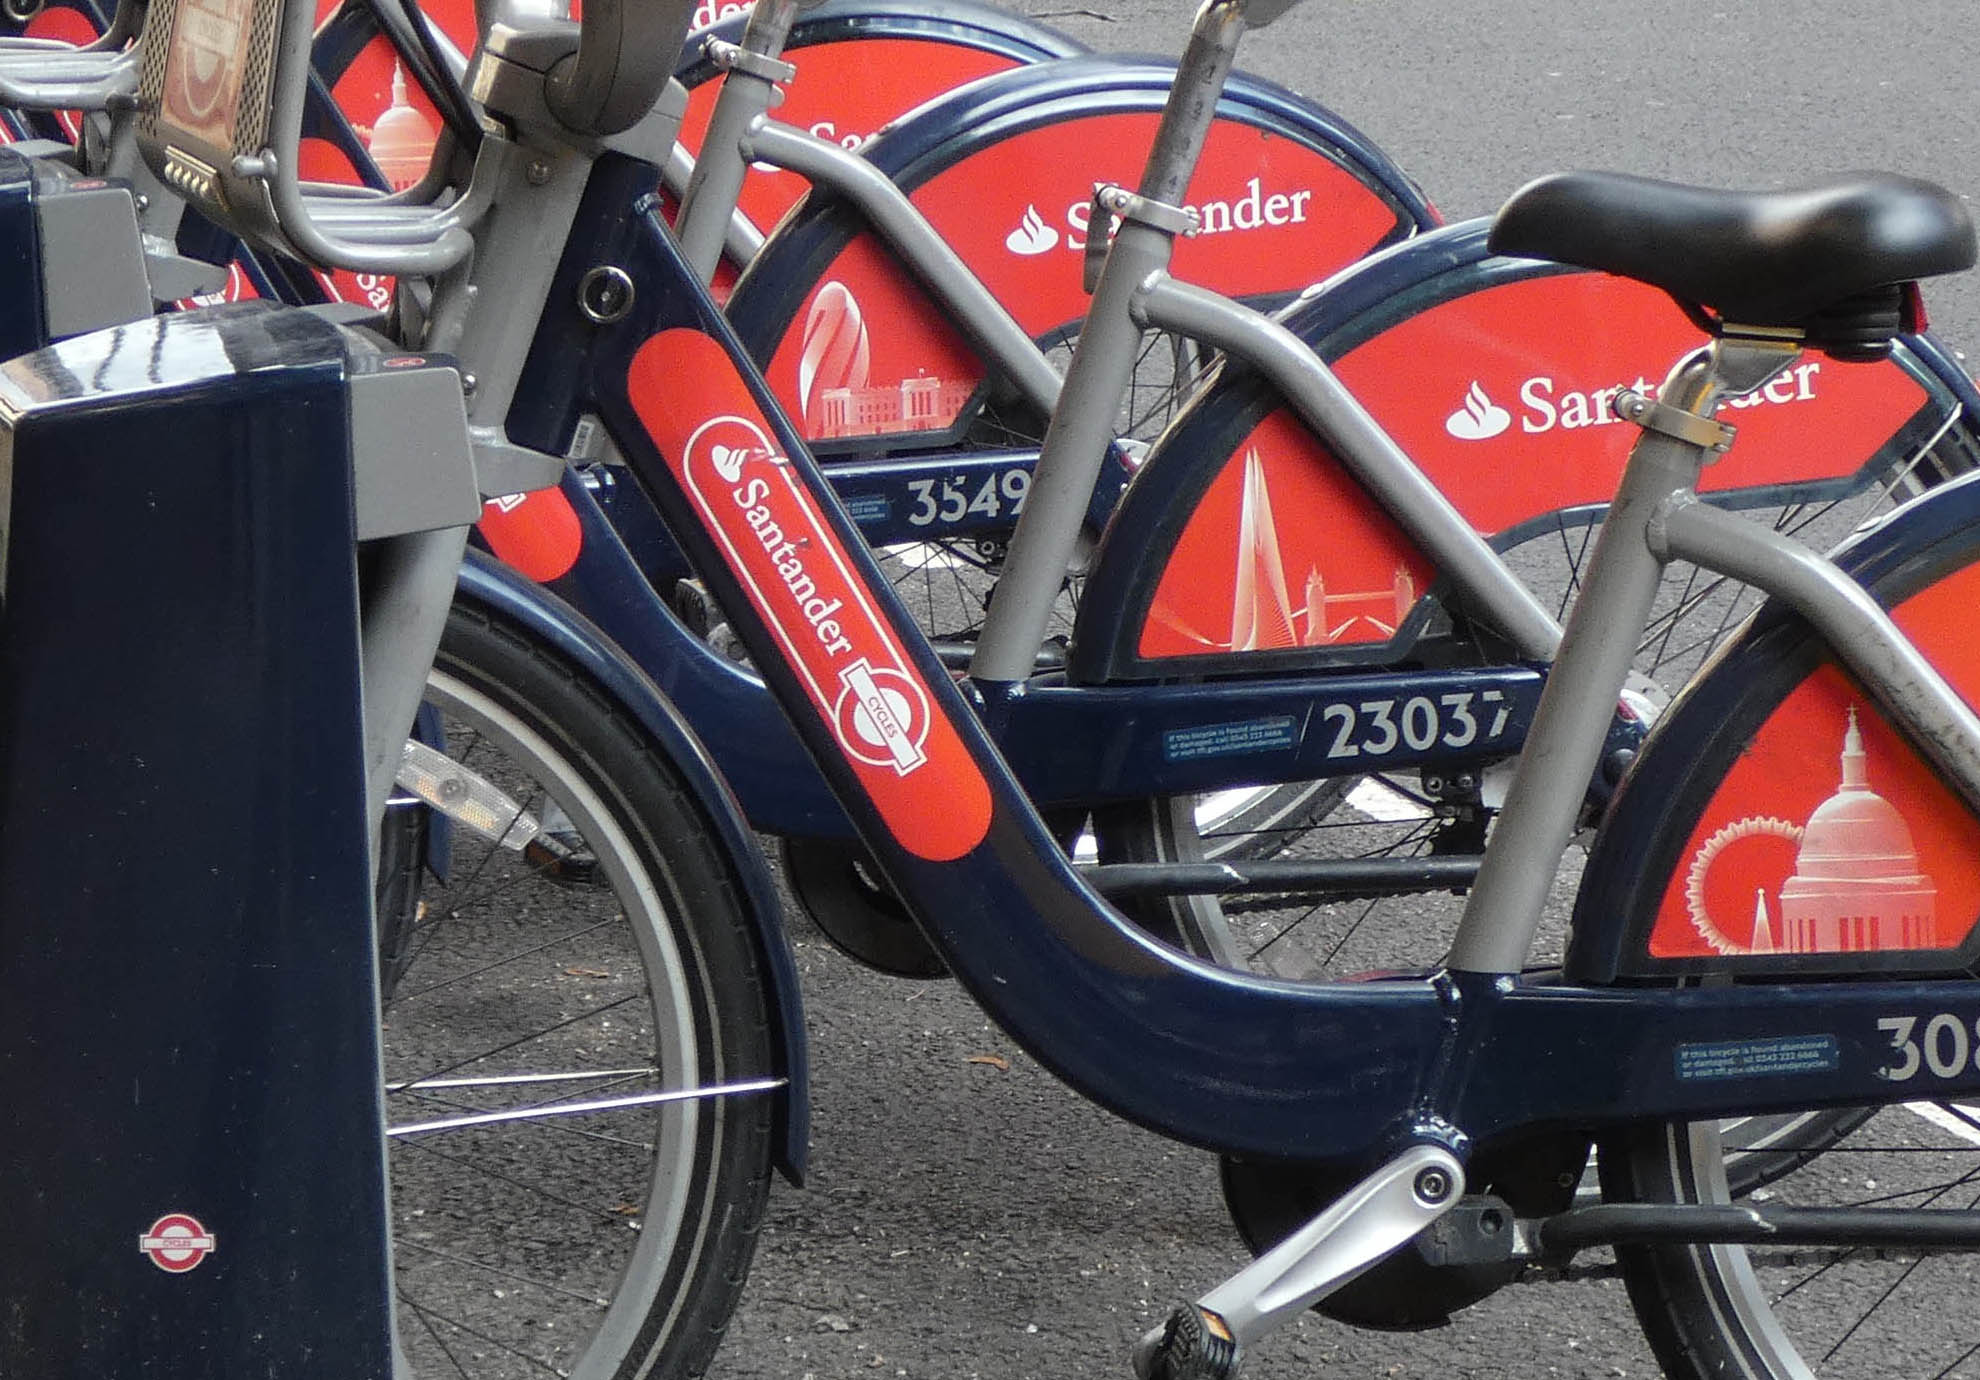 Next generation of Santander Cycles arrive in London